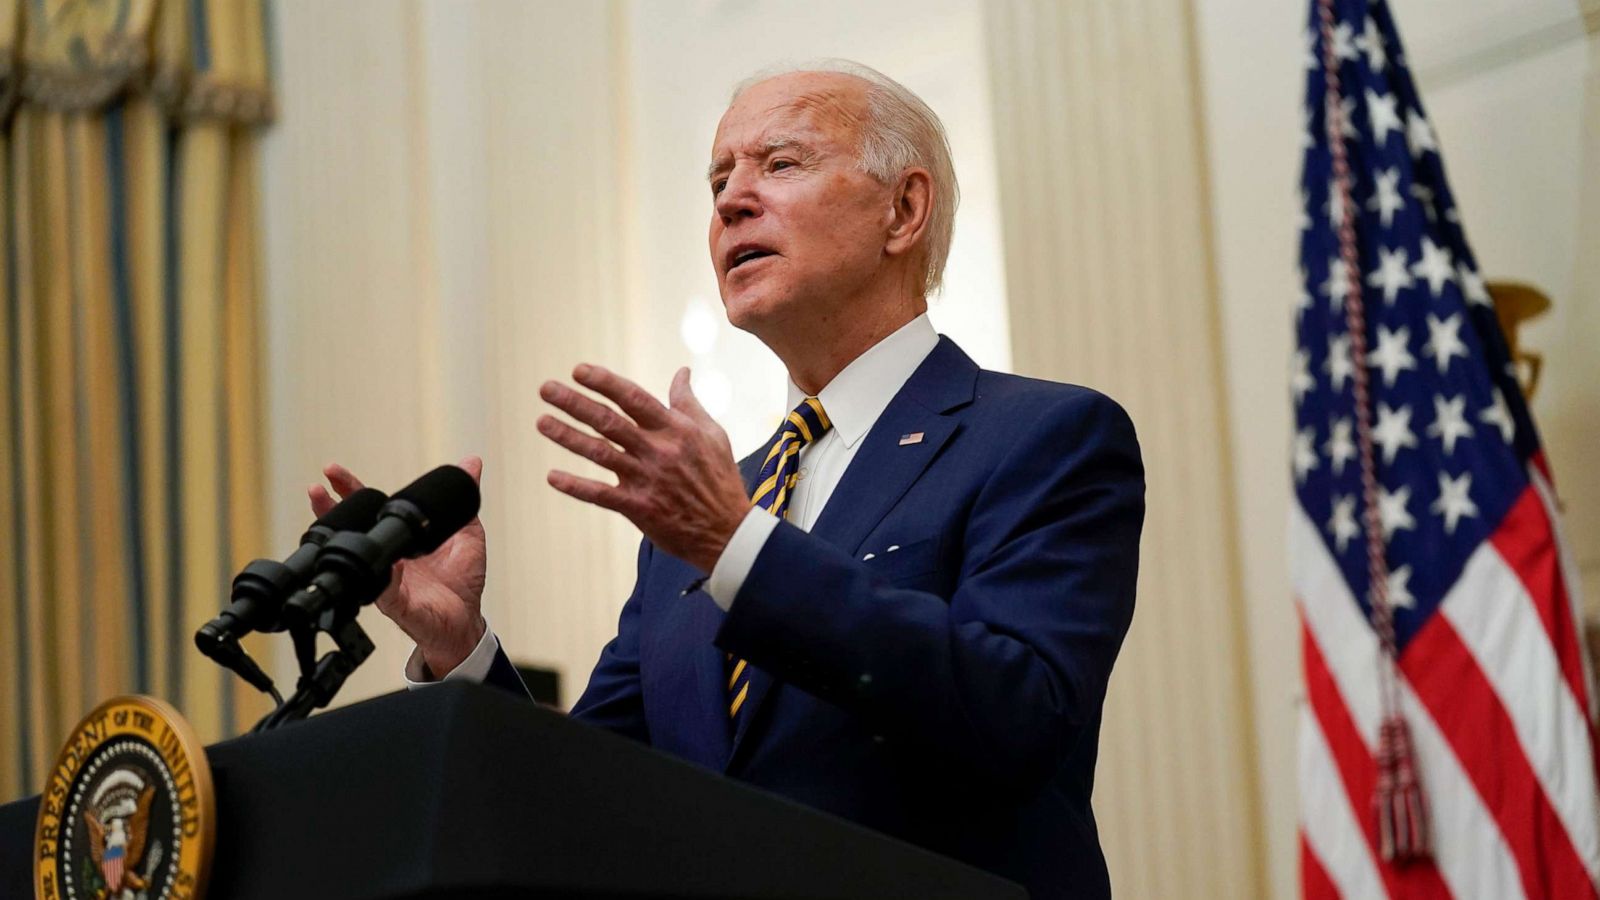 Biden to rally US 1st major foreign policy speech - ABC